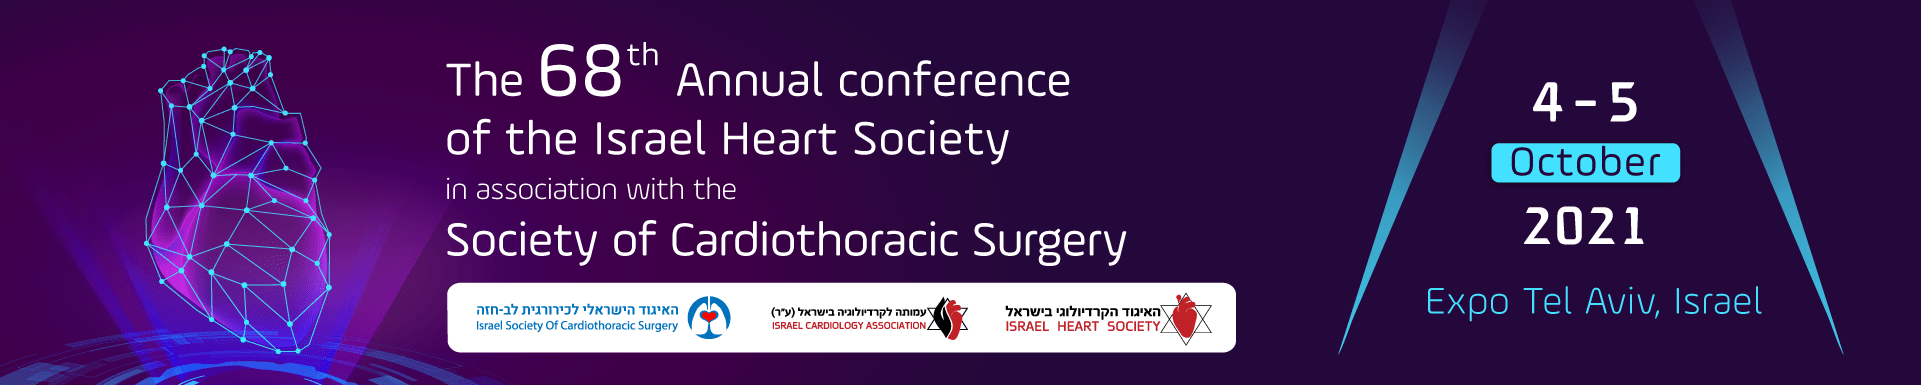 The 68th Annual Conference of the Israel Heart Society